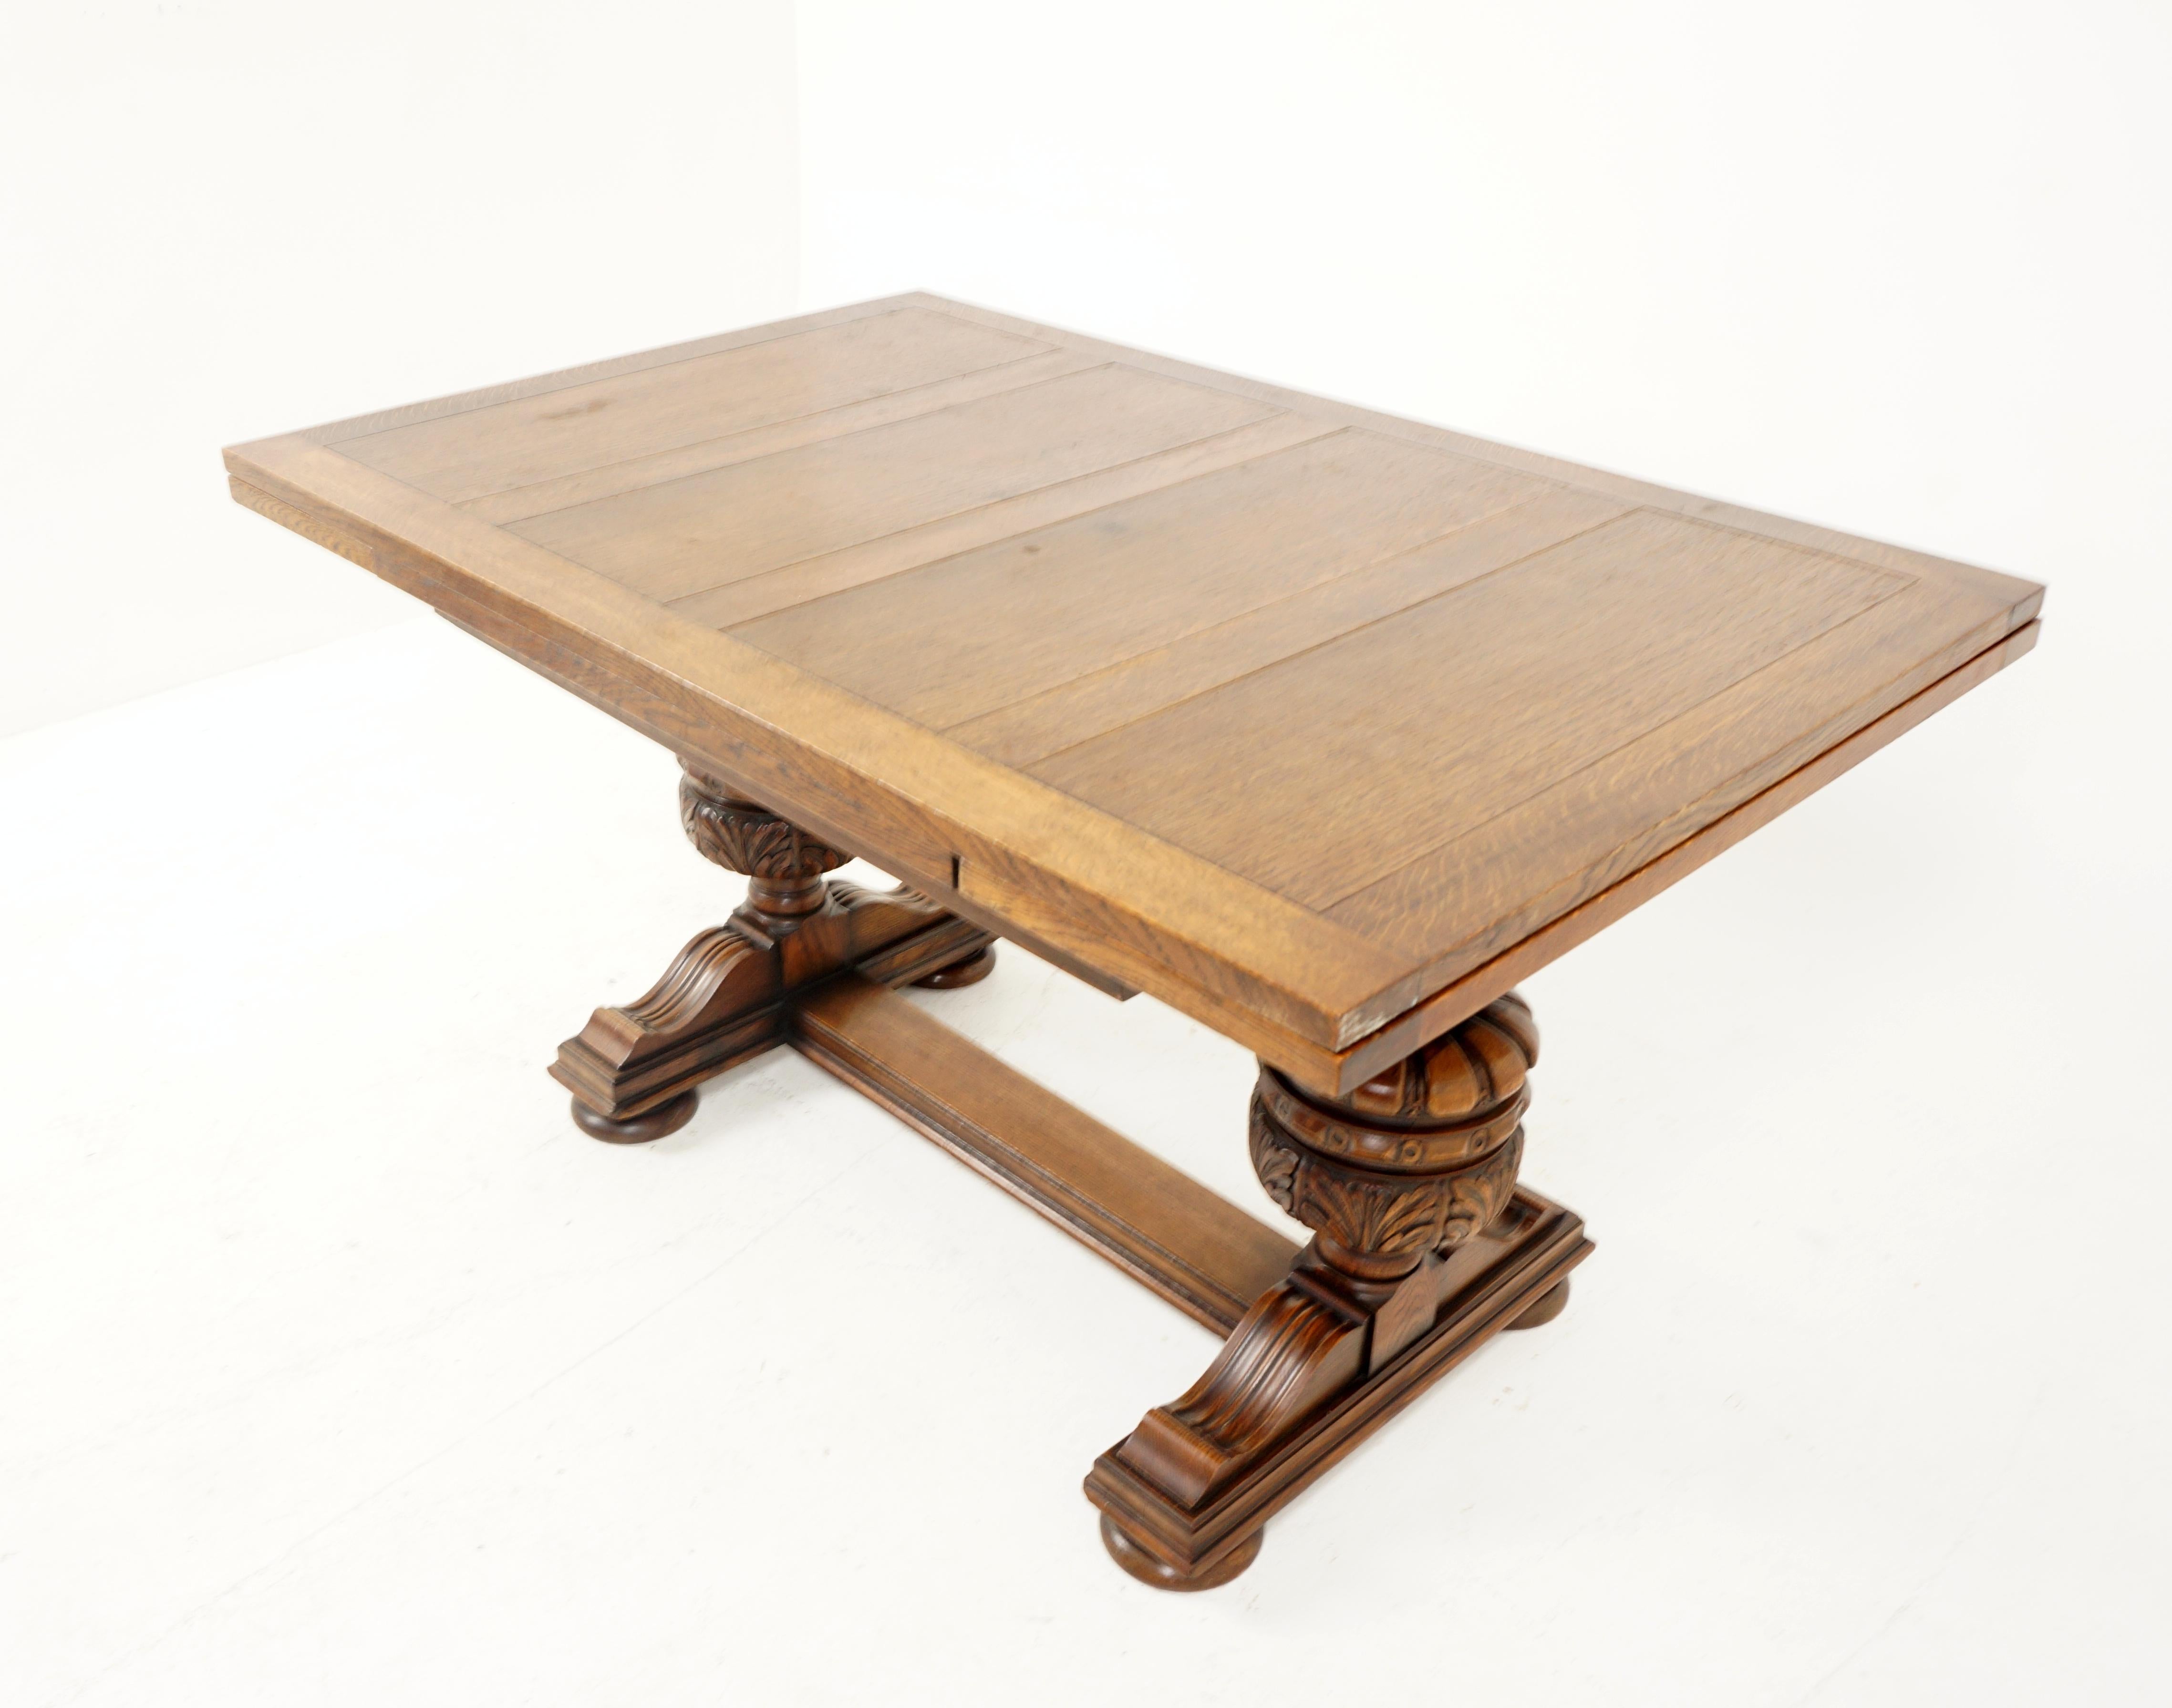 Antique Large Carved Oak Refectory draw leaf dining table & leaves, Scotland 1920, B2626

Scotland 1920
Solid Oak & veneer
Original finish
Rectangular paneled top with 2 hidden leaves that pull out at each end
Standing on 2 superb carved